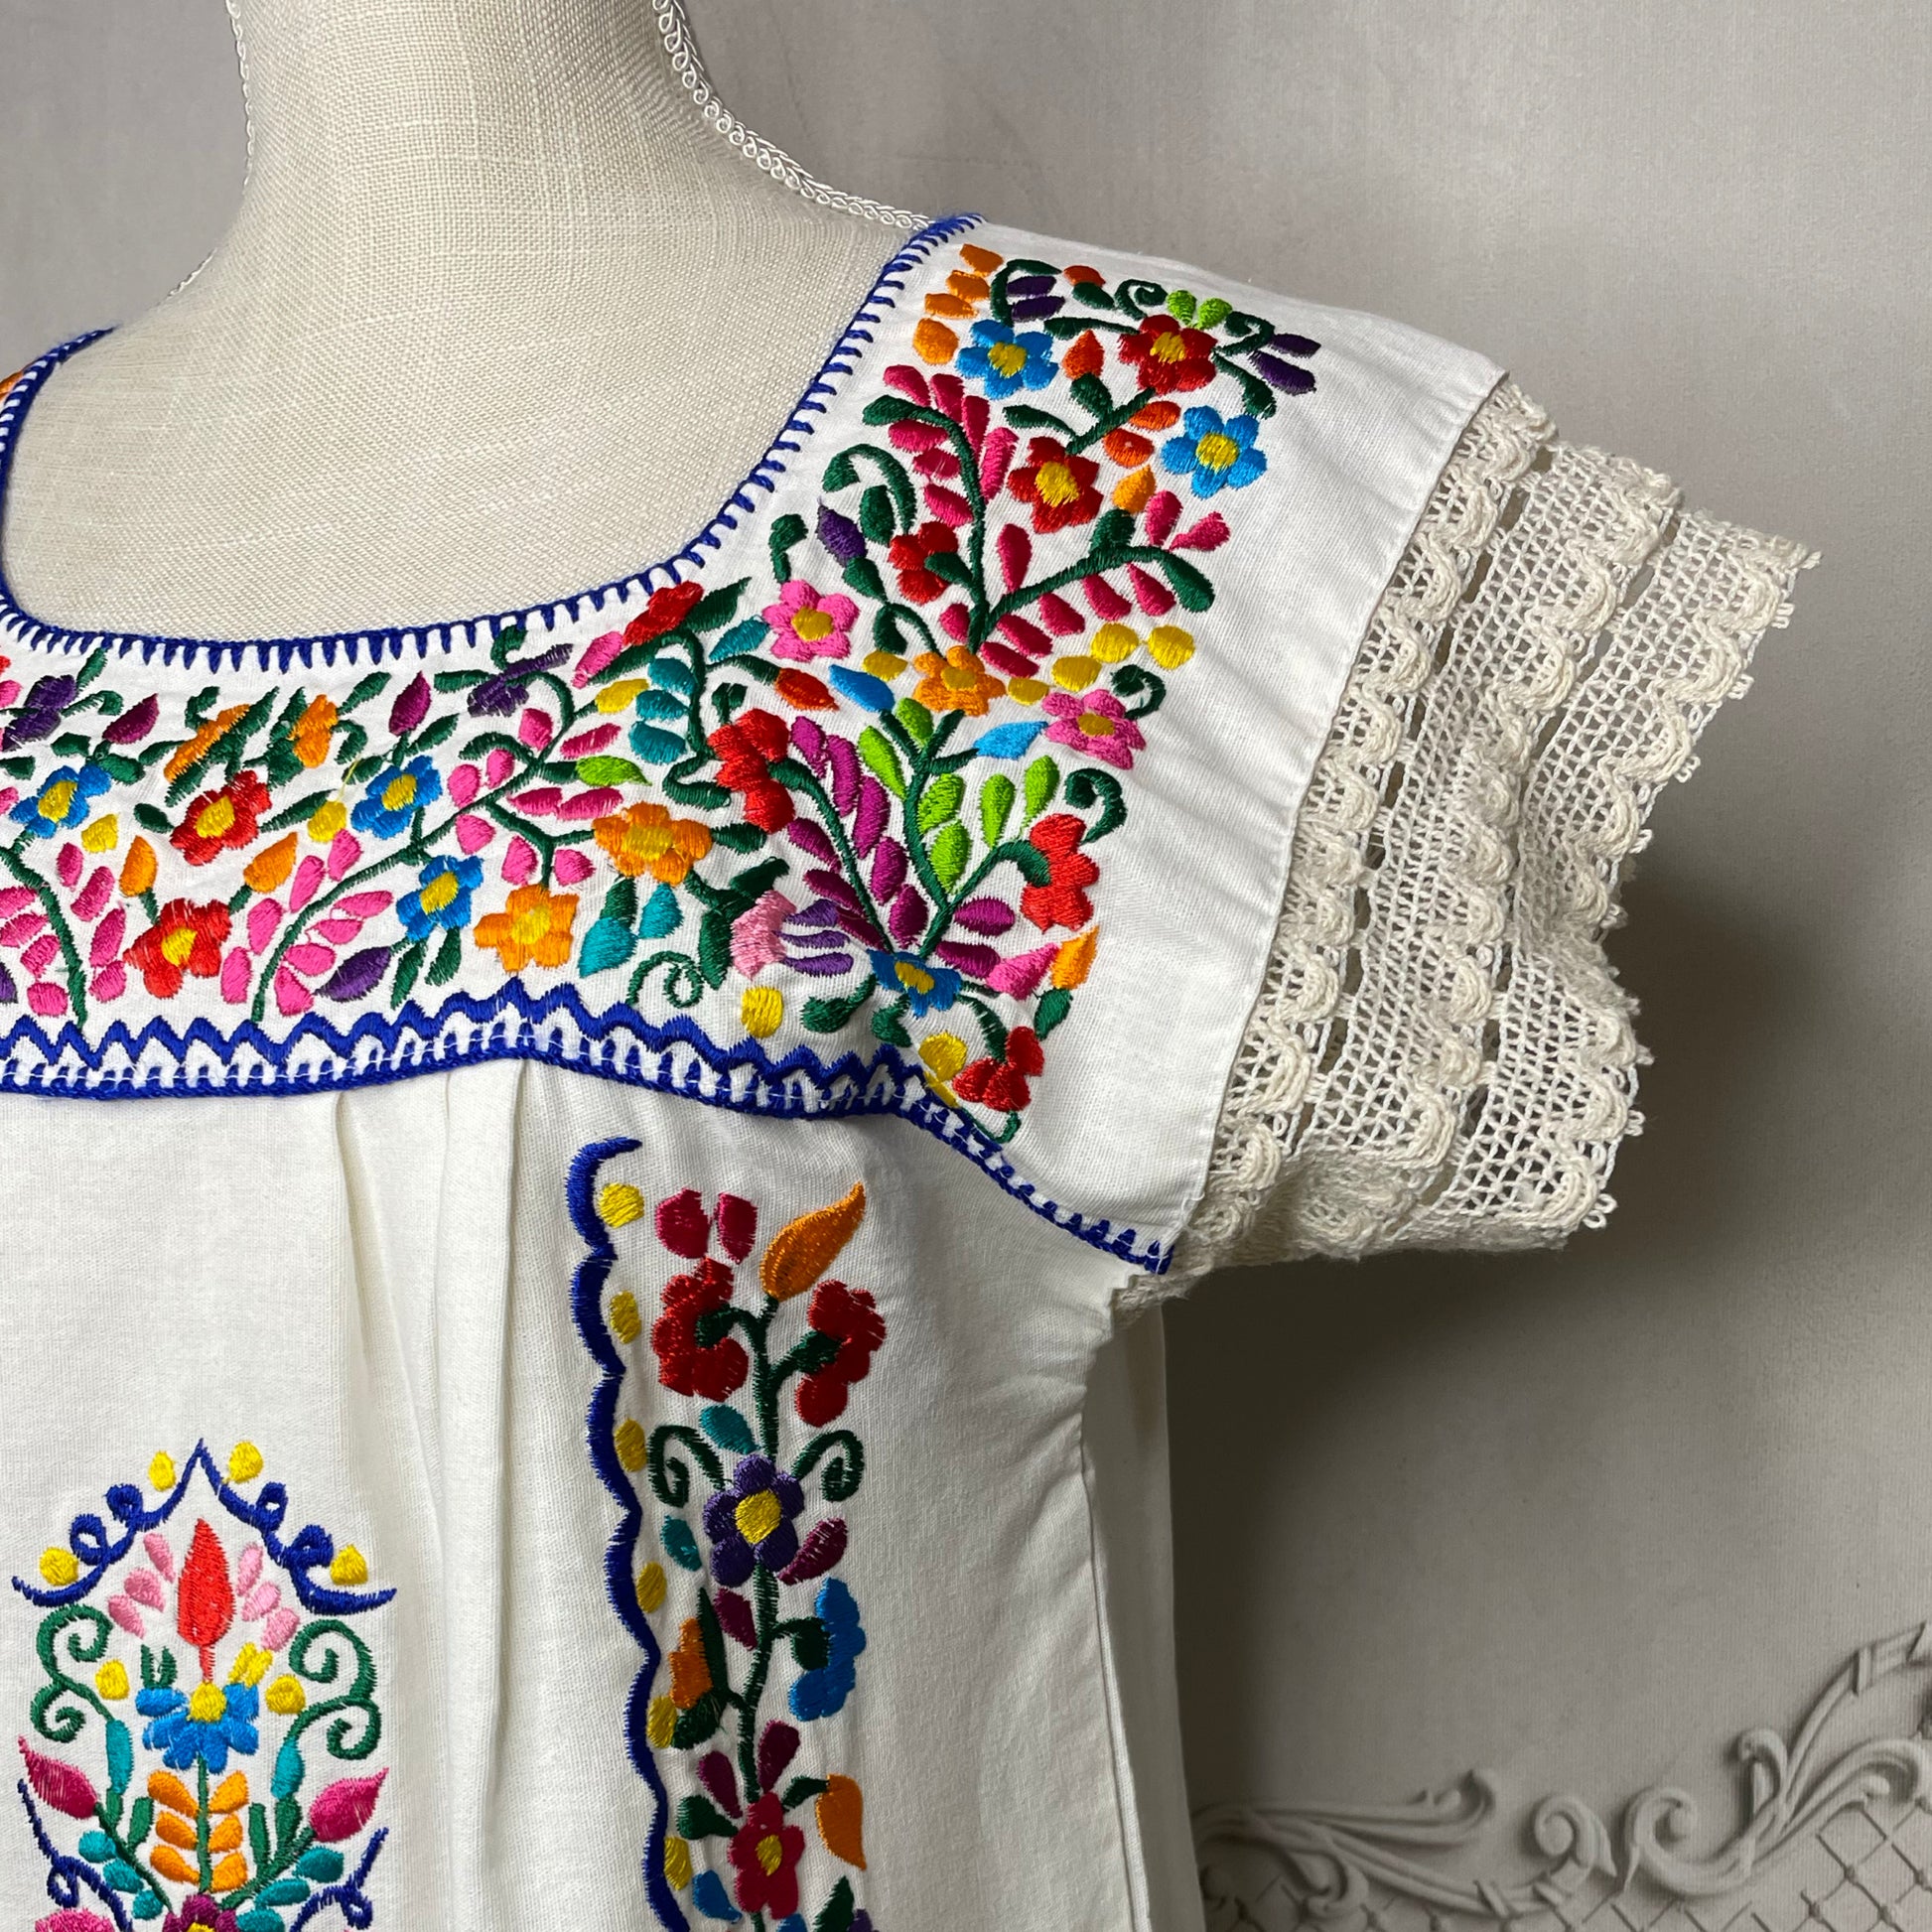 Laced Trim Mexican Dress - Daisy – Camelia Mexican Boutique